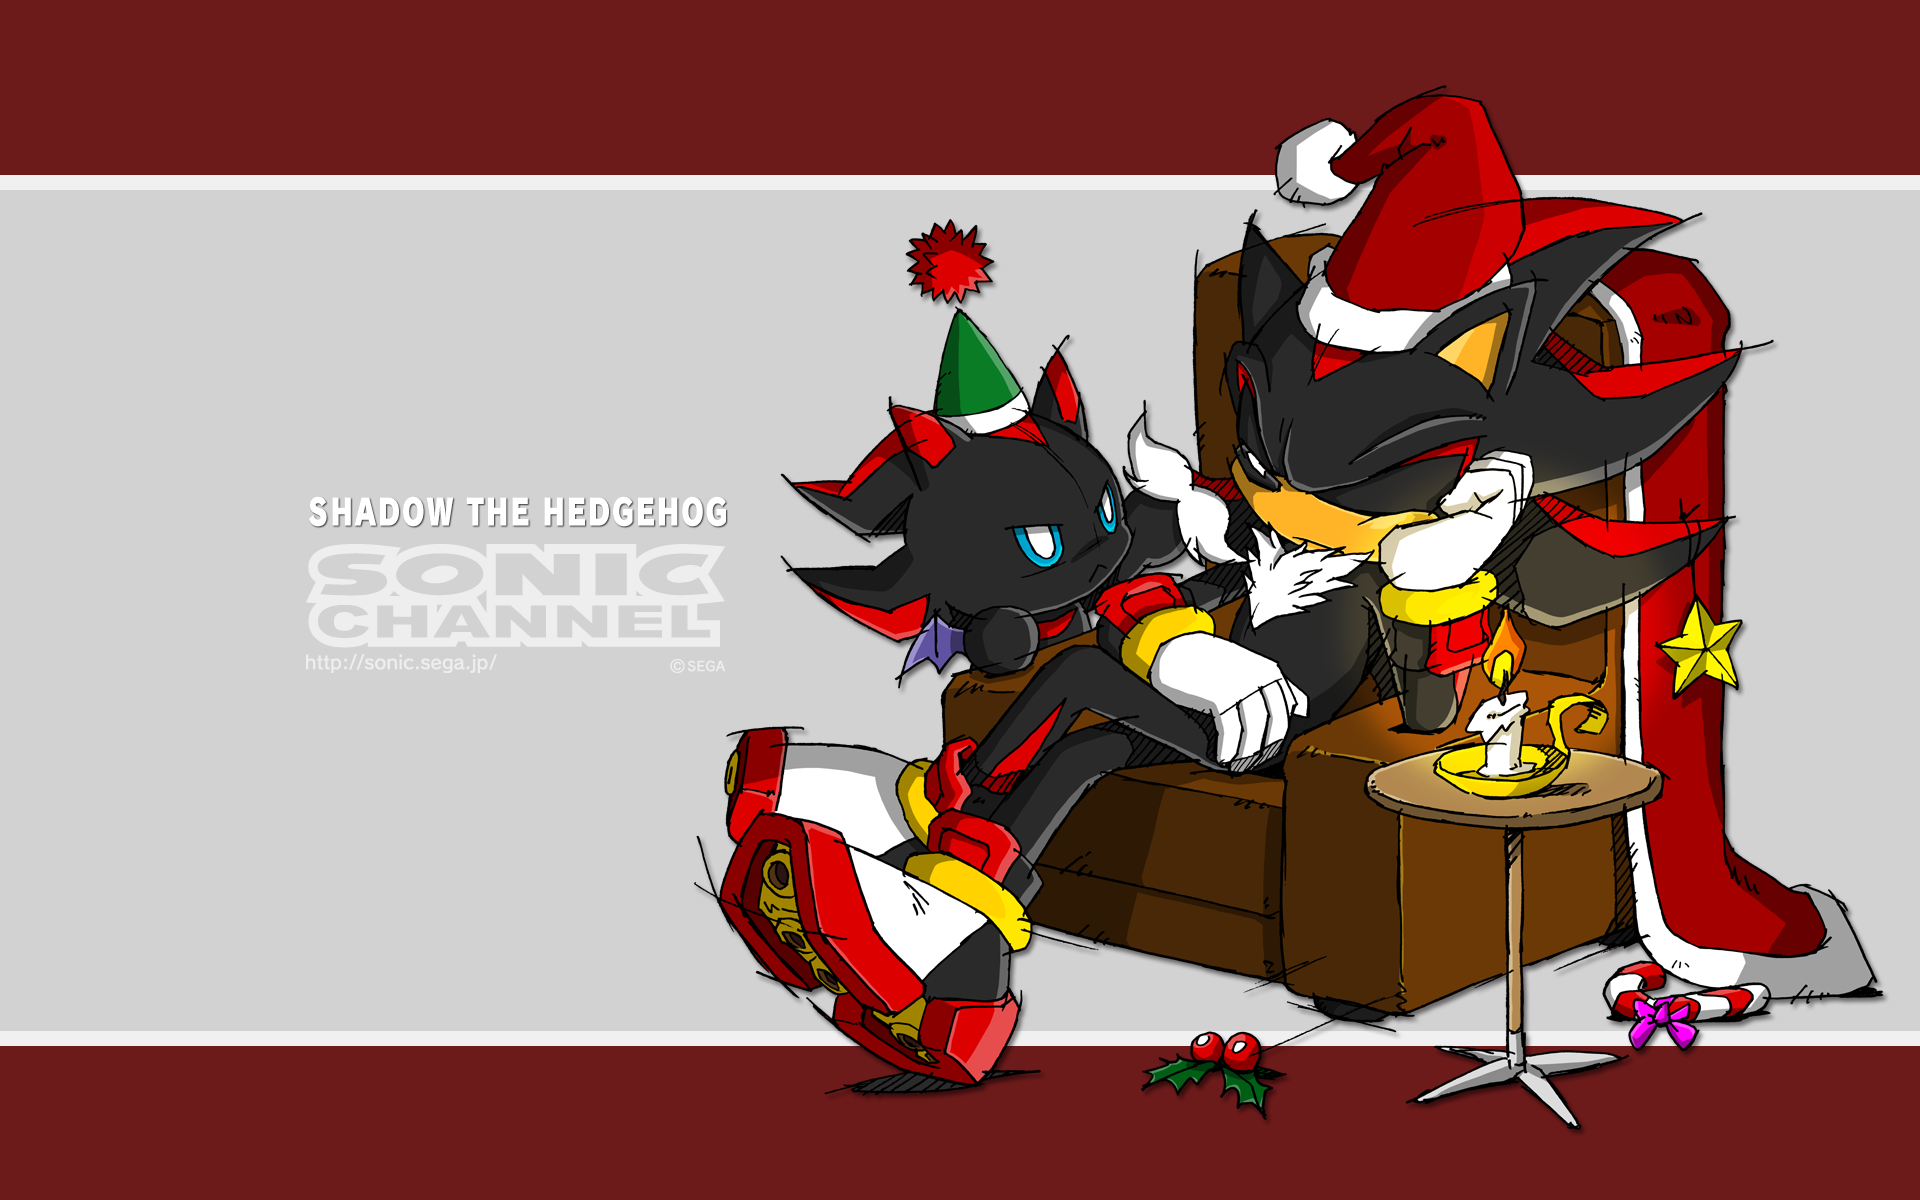 [download This Wallpaper For Pc] - Shadow The Hedgehog Sonic Channel , HD Wallpaper & Backgrounds